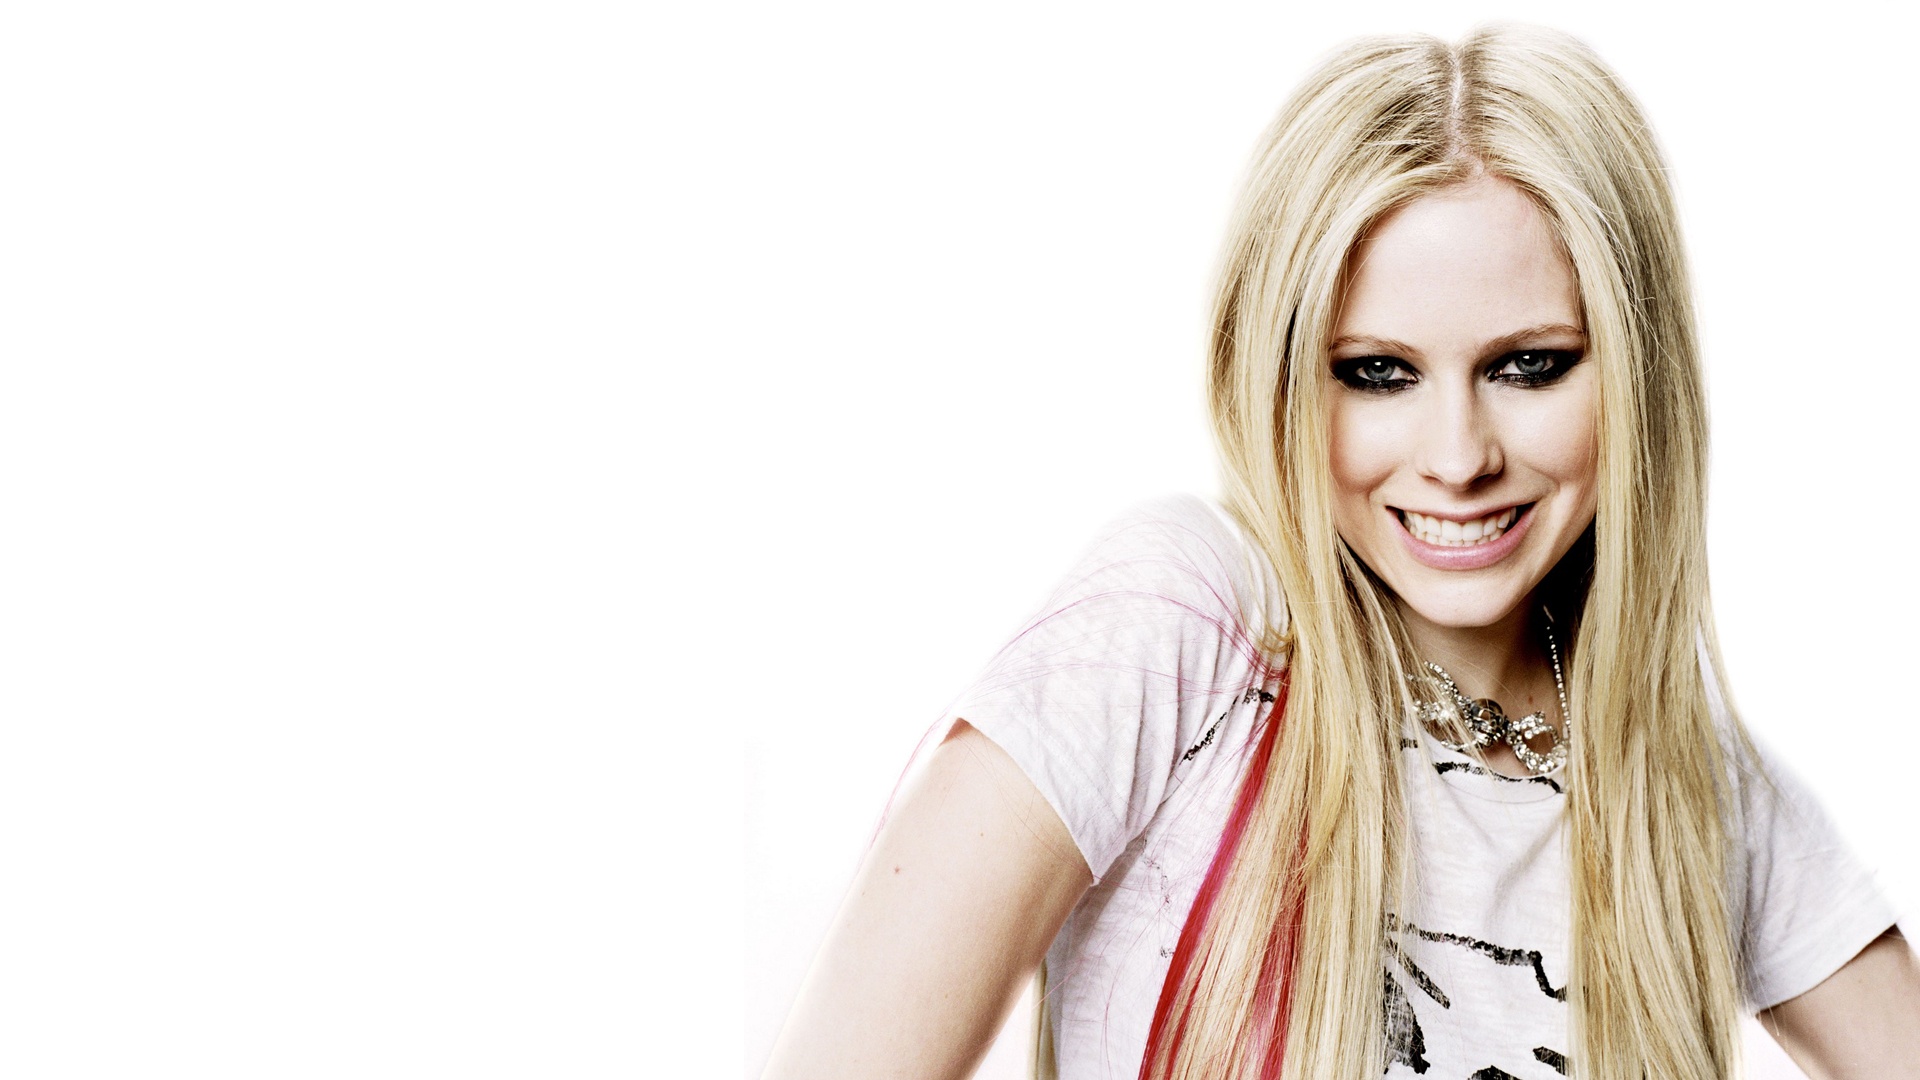 🔥 Download Avril Lavigne The Best Damn Thing Photoshoot Wallpaper by